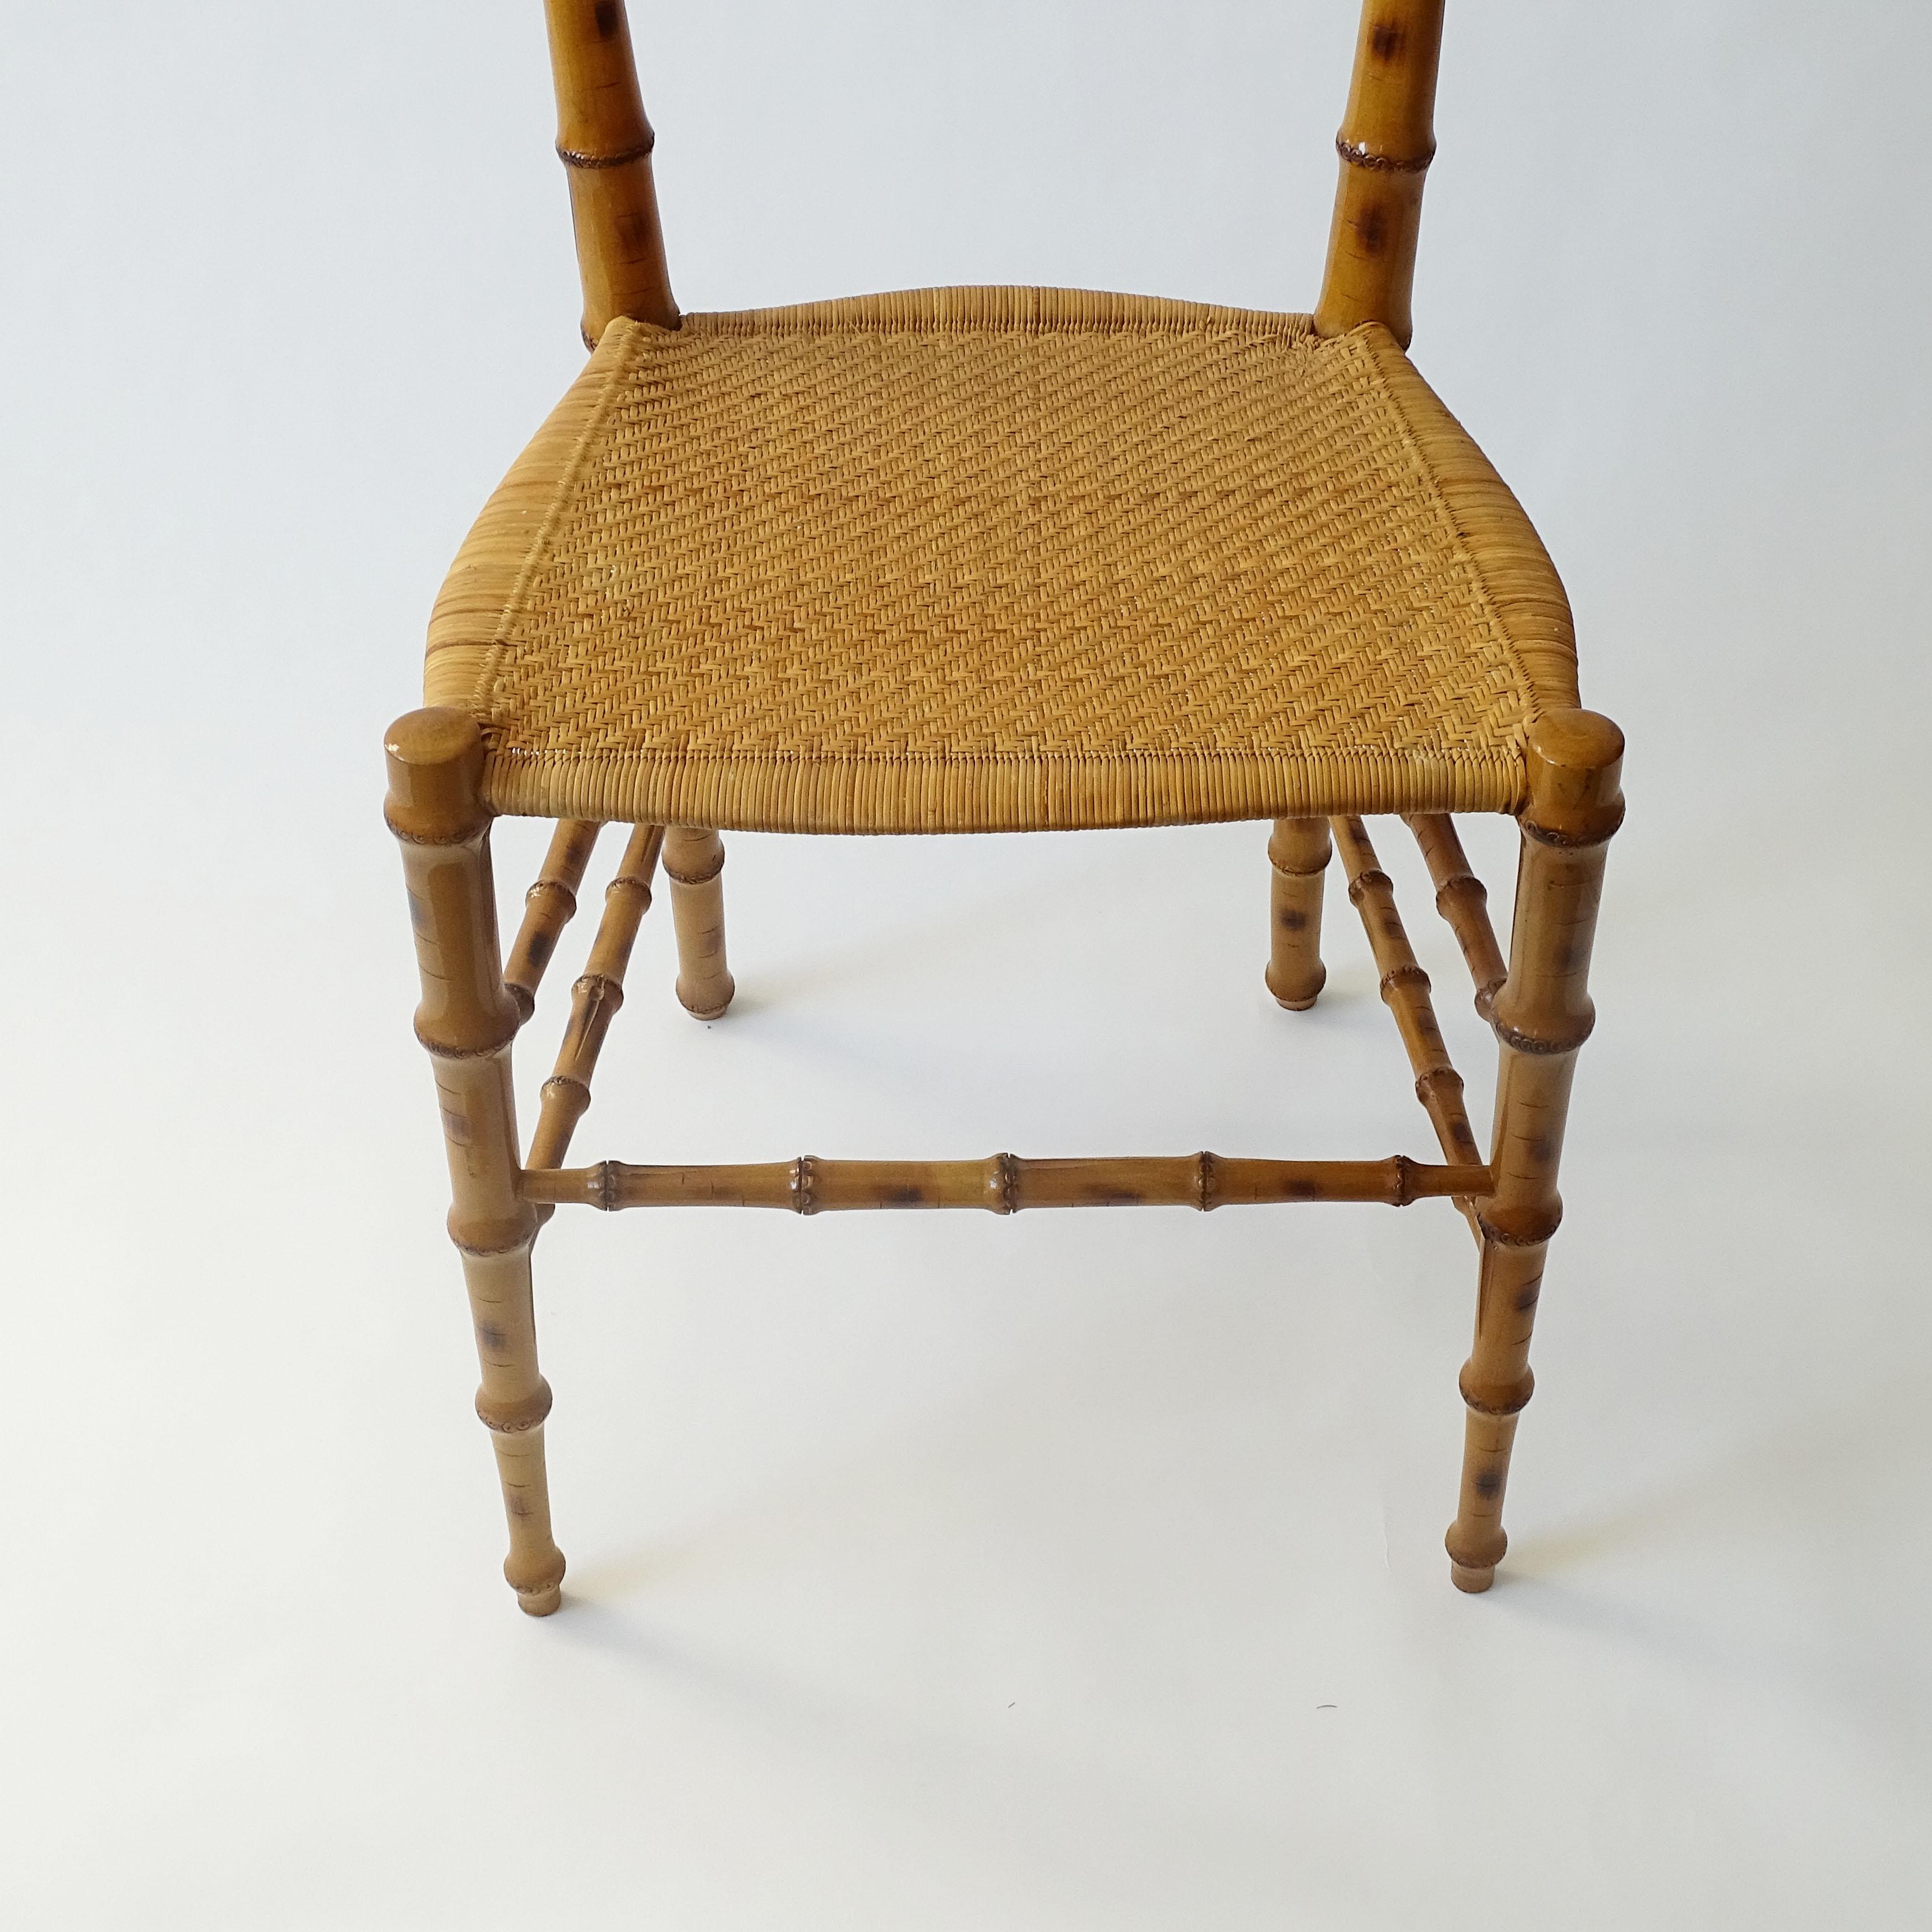 Splendid set of Six Faux Bamboo Chiavarina Chairs, Italy 1950s For Sale 3